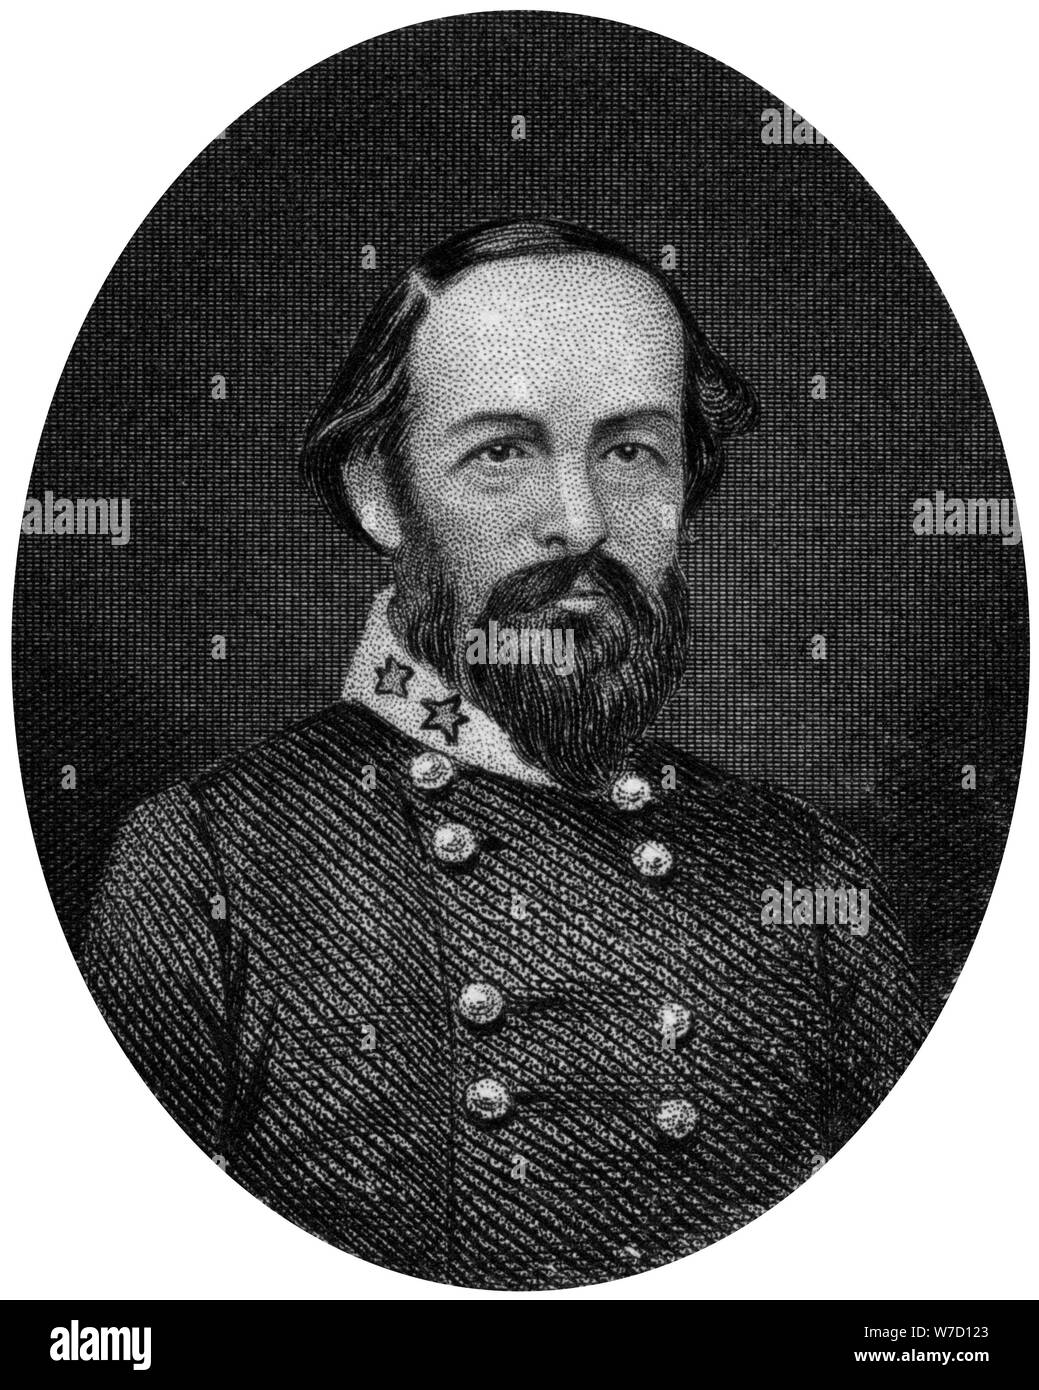 Edmund Kirby Smith, Confederate general, 1862-1867.Artist: J Rogers Stock Photo